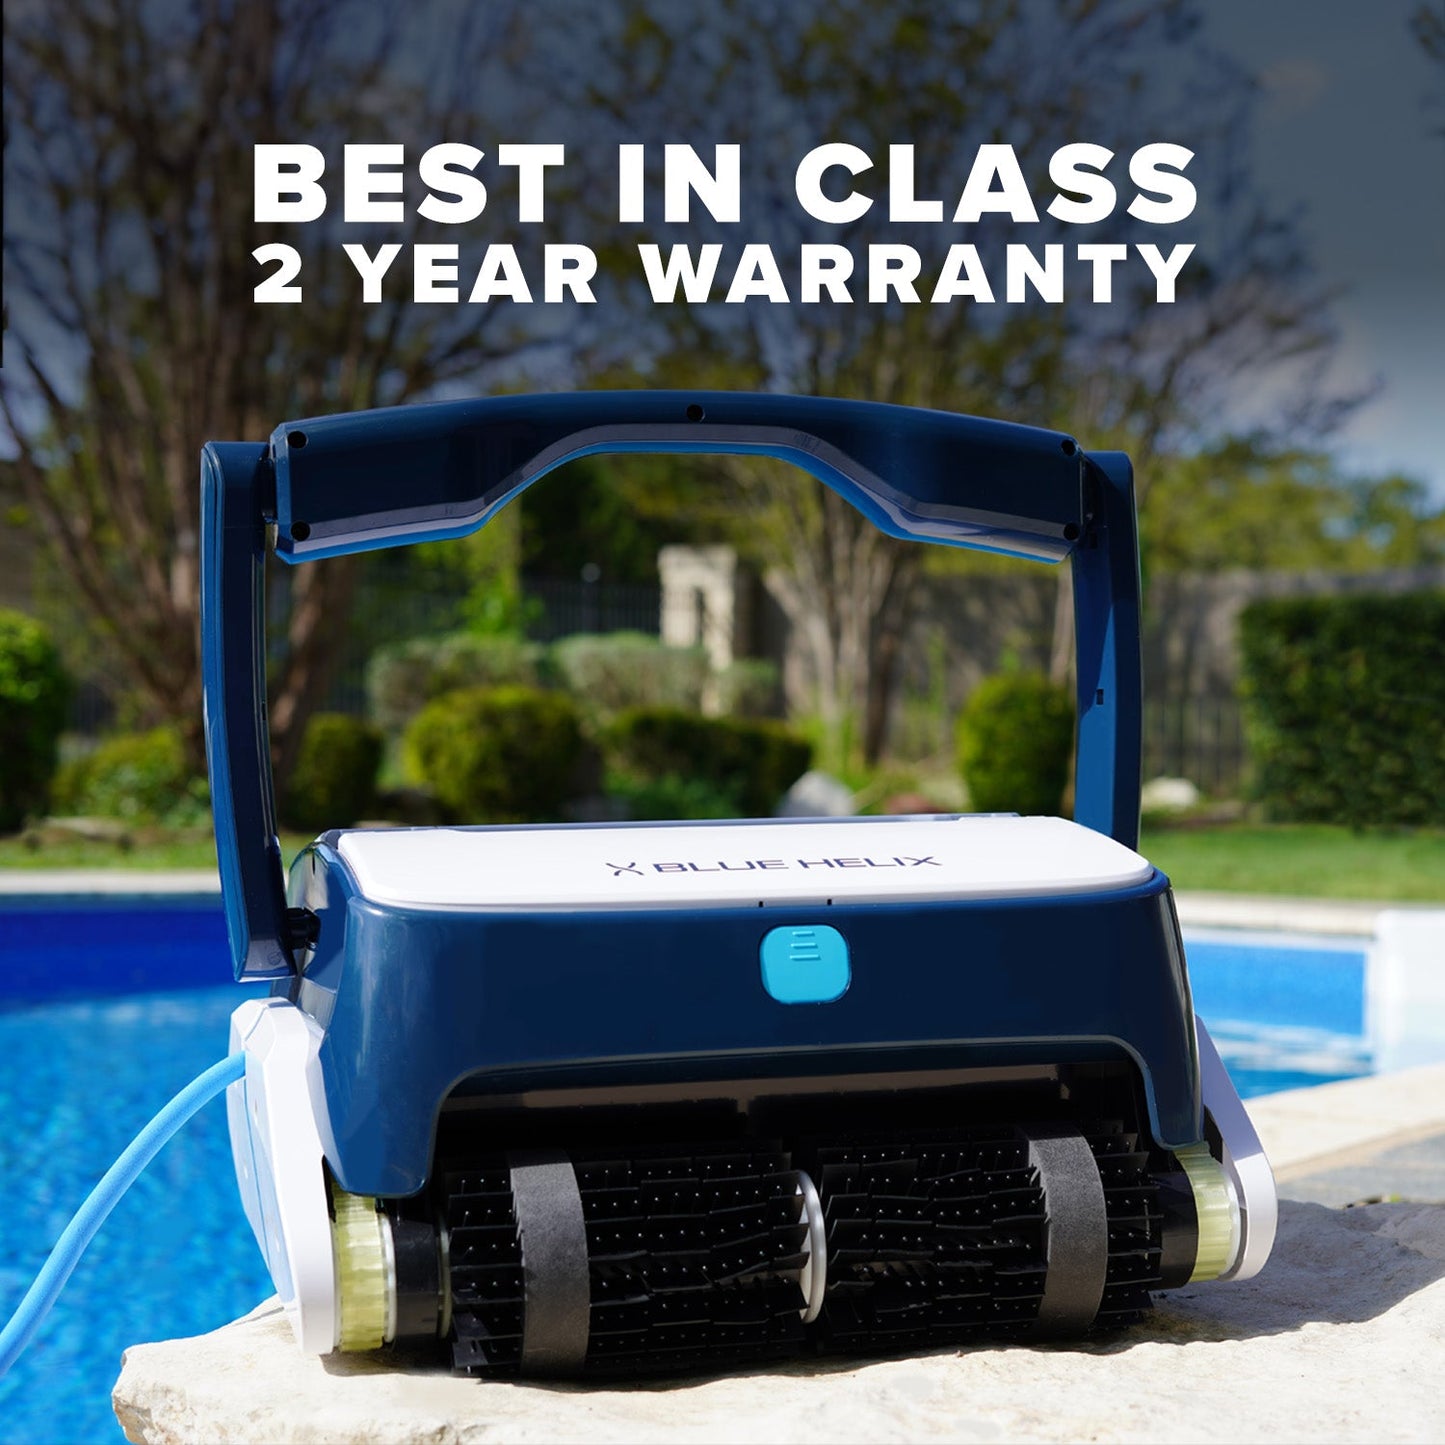 Blue Helix Robotic Pool Cleaner